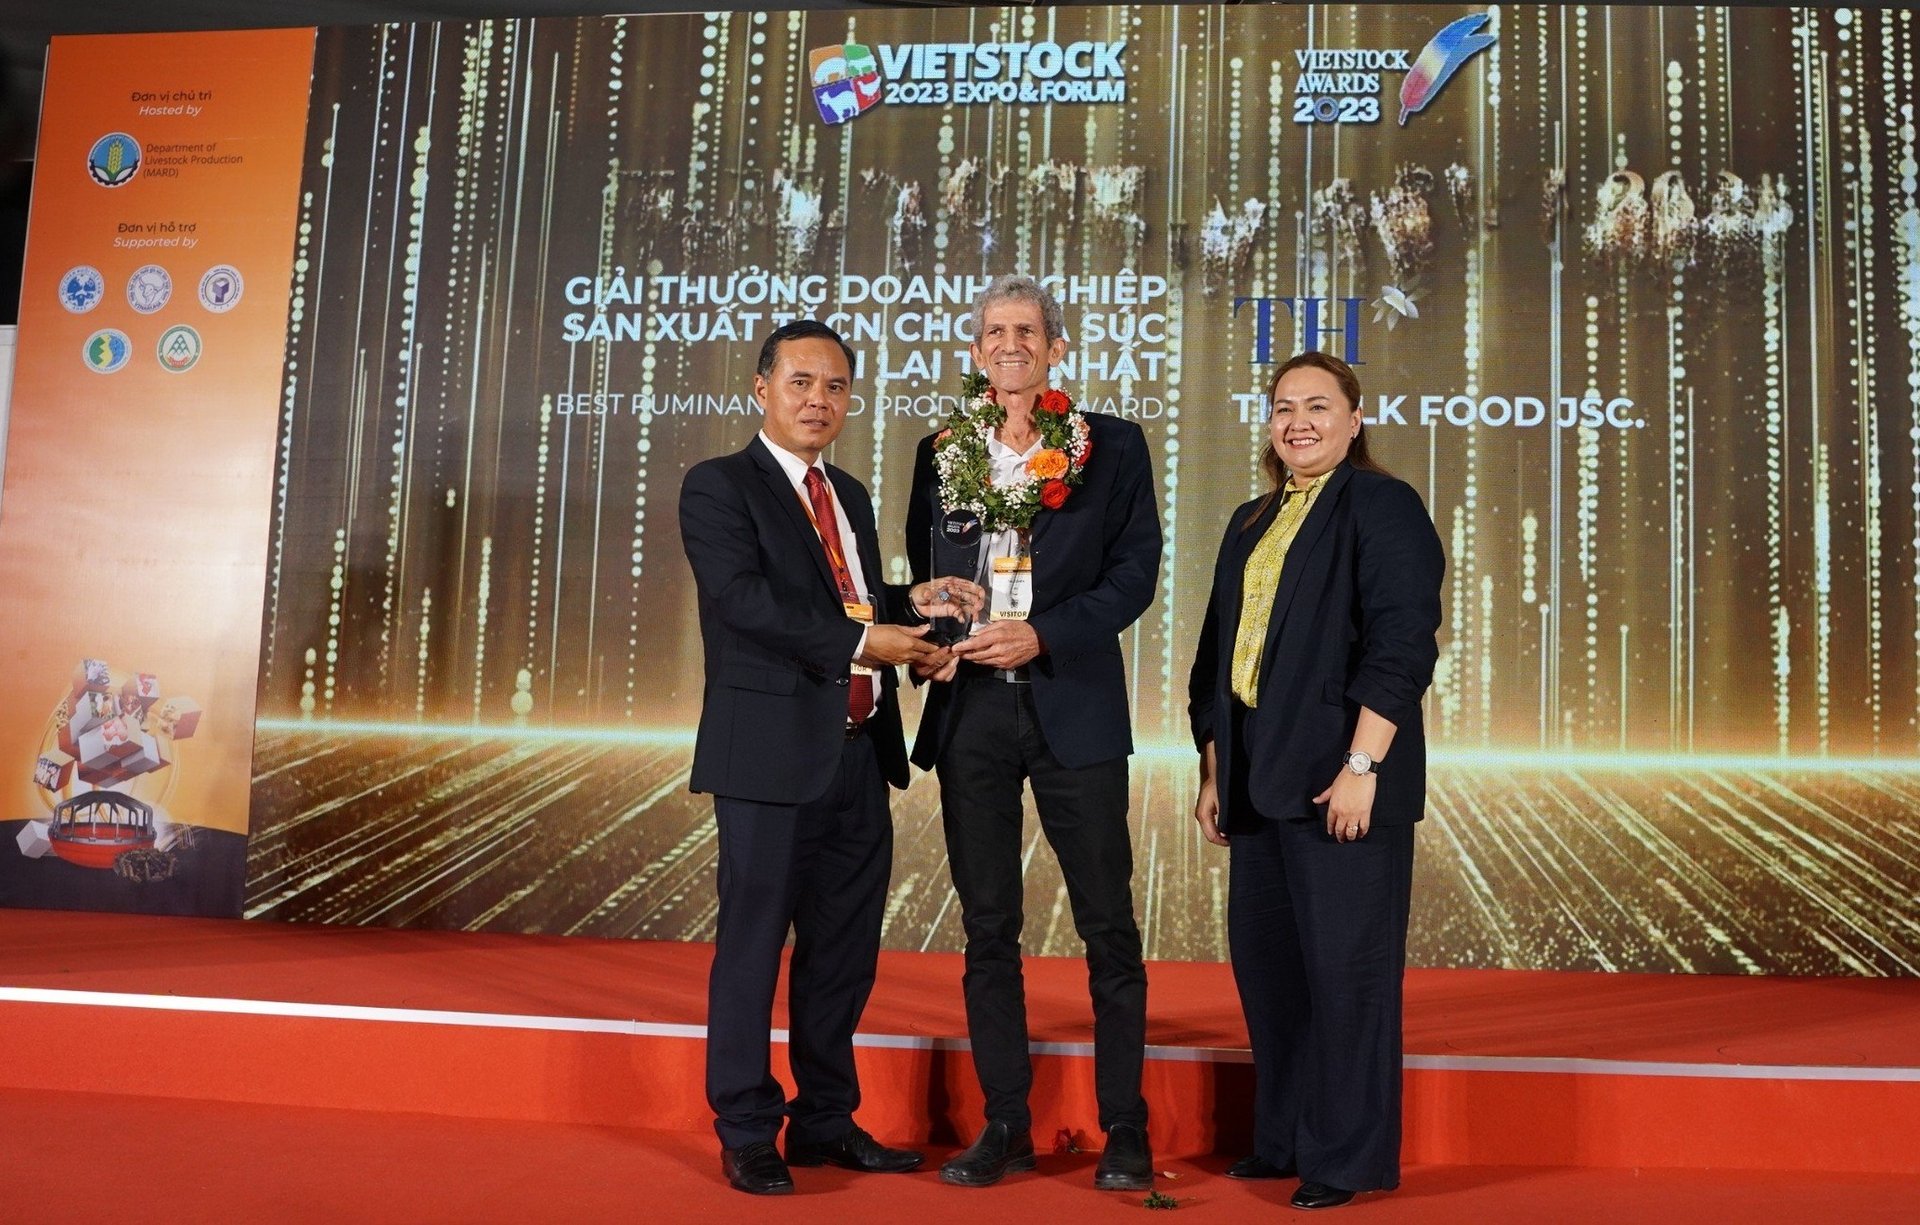 Mr. Tal Cohen, CEO of TH Food Company, receiving the award for the 'Best Livestock Feed Producer' in 2023.